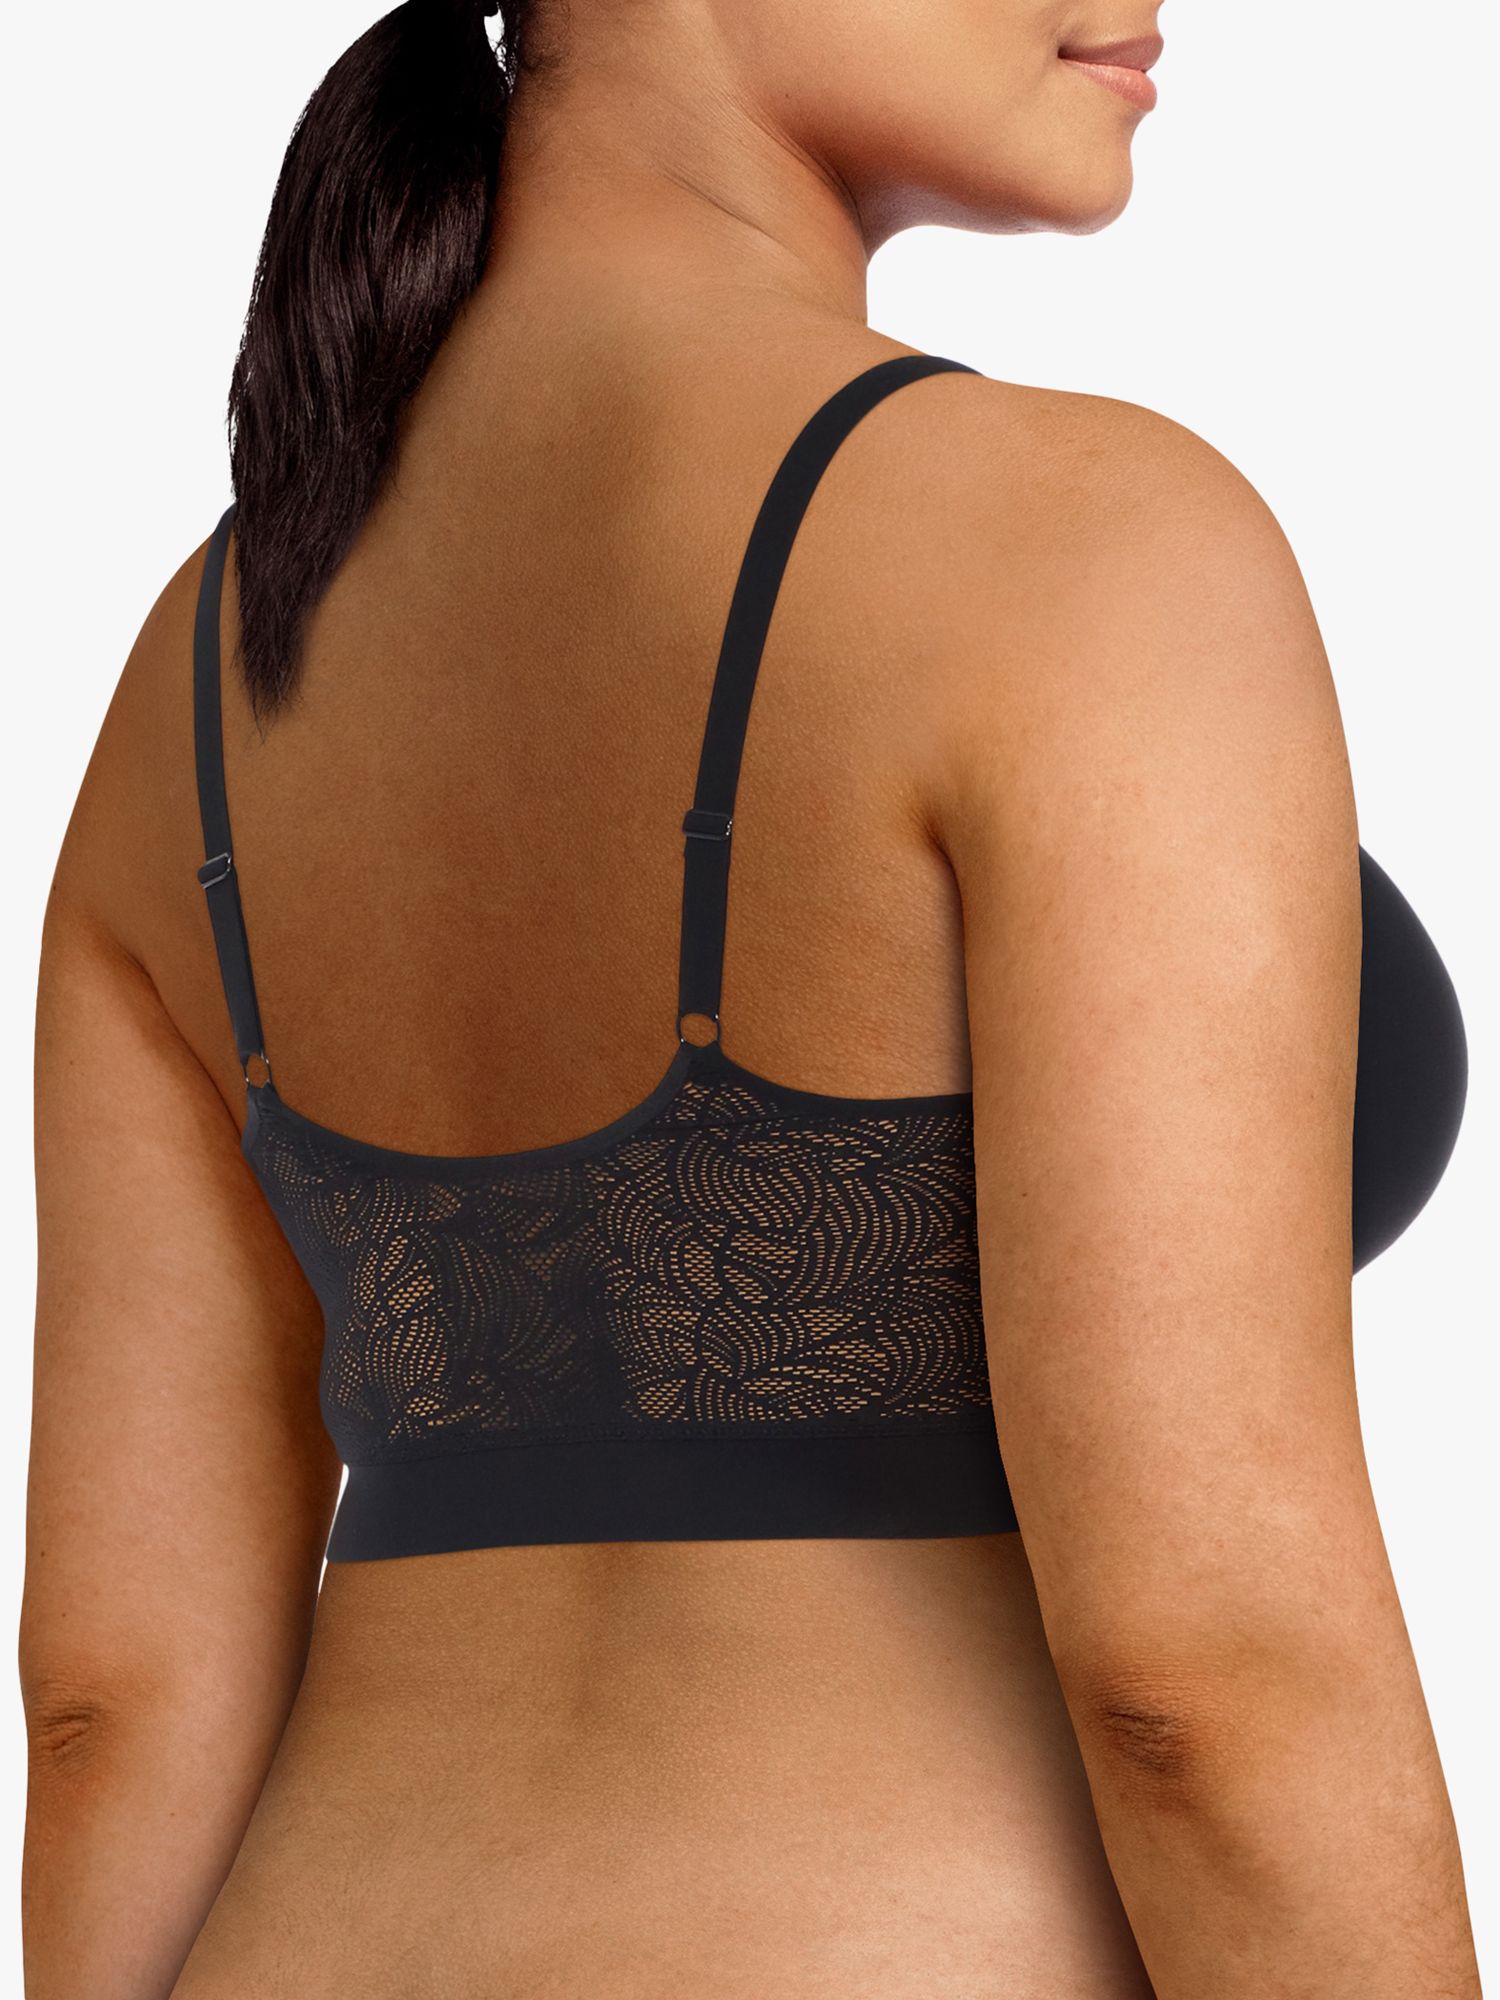 LBECLEY Womens Lingerie Crop Top Pack Womens Lace Unwired Bra